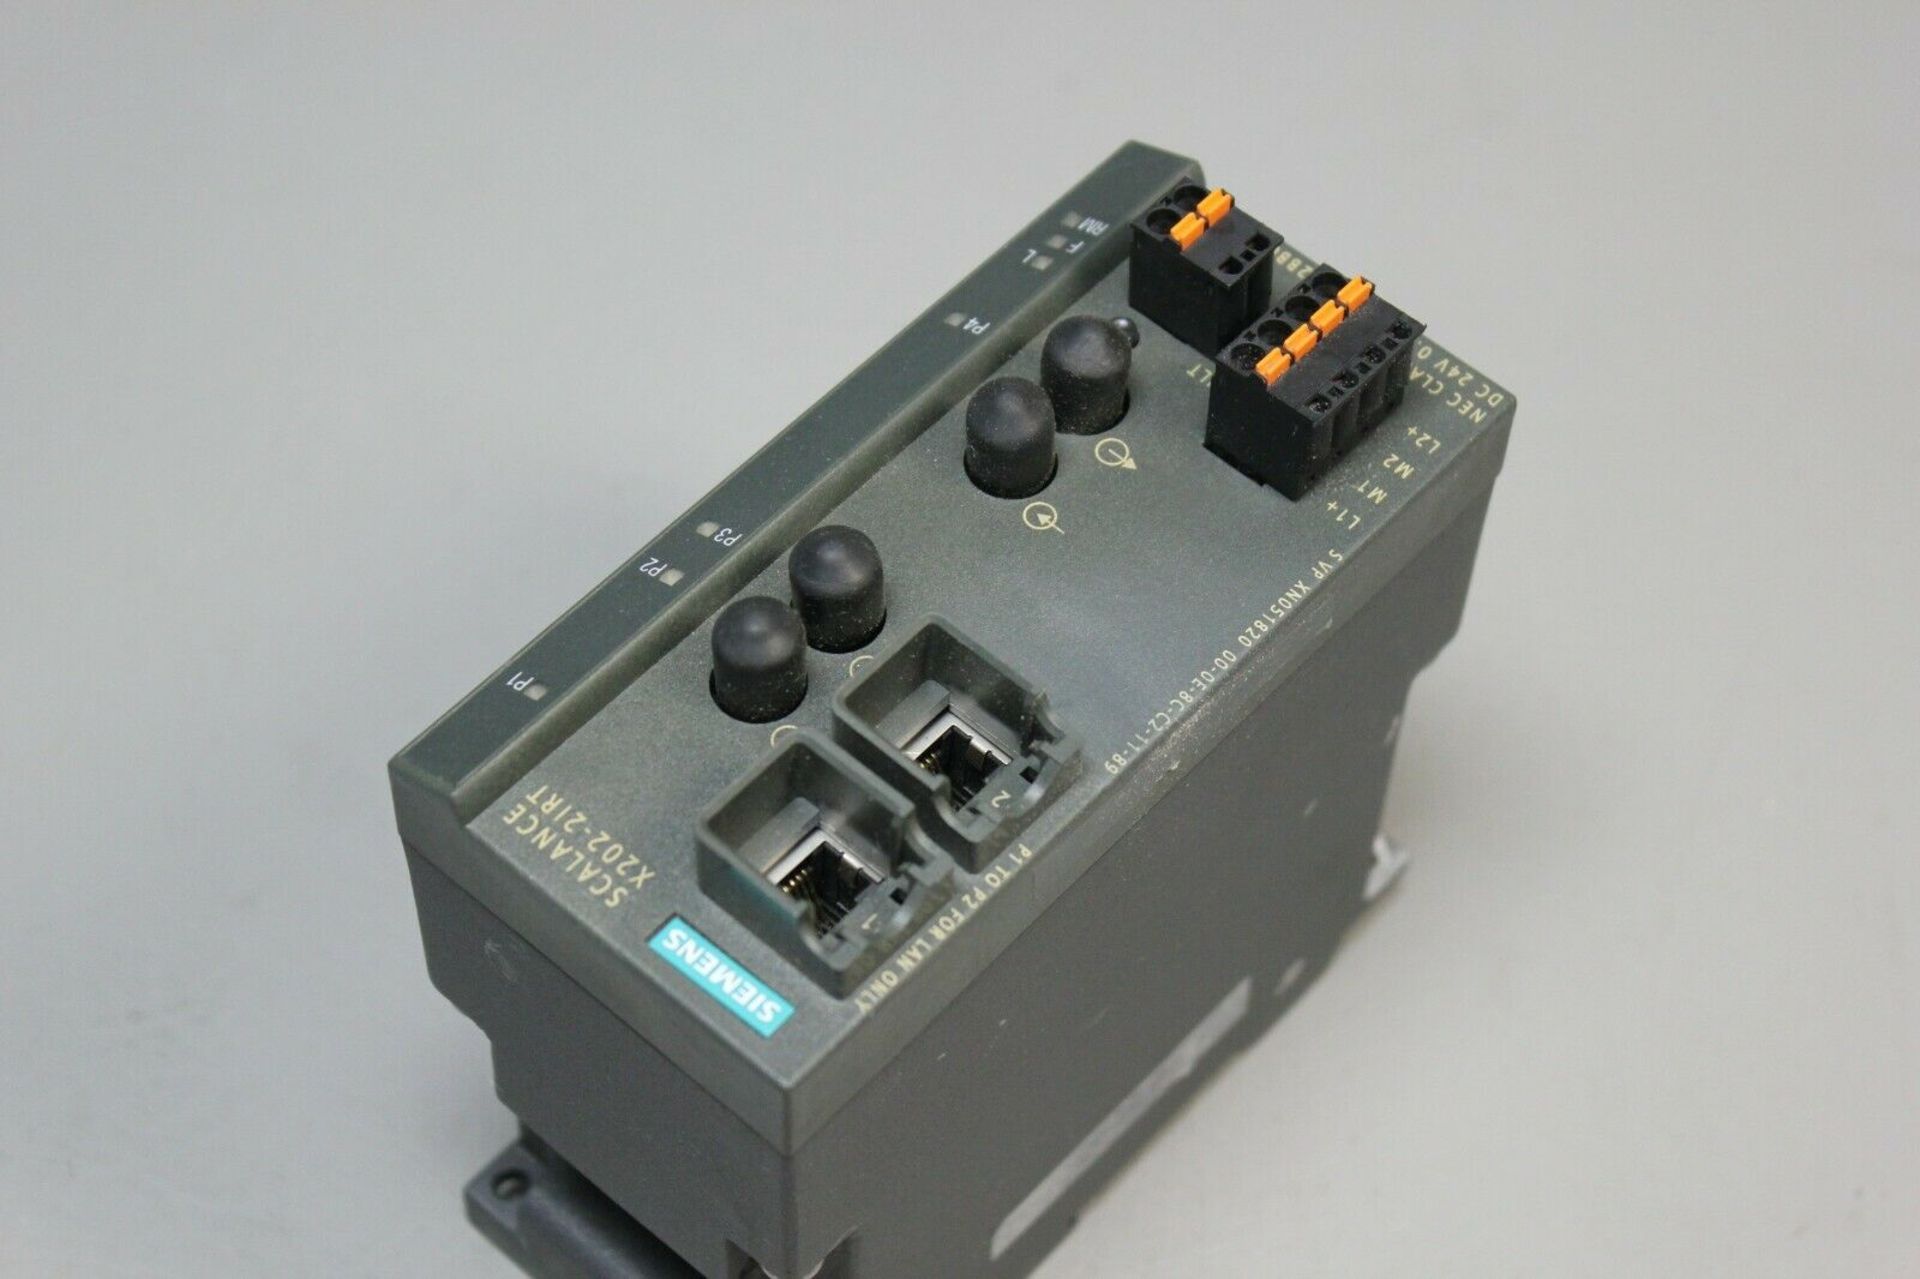 SIEMENS SIMATIC NET INDUSTRIAL ETHERNET SWITCH - Image 2 of 3